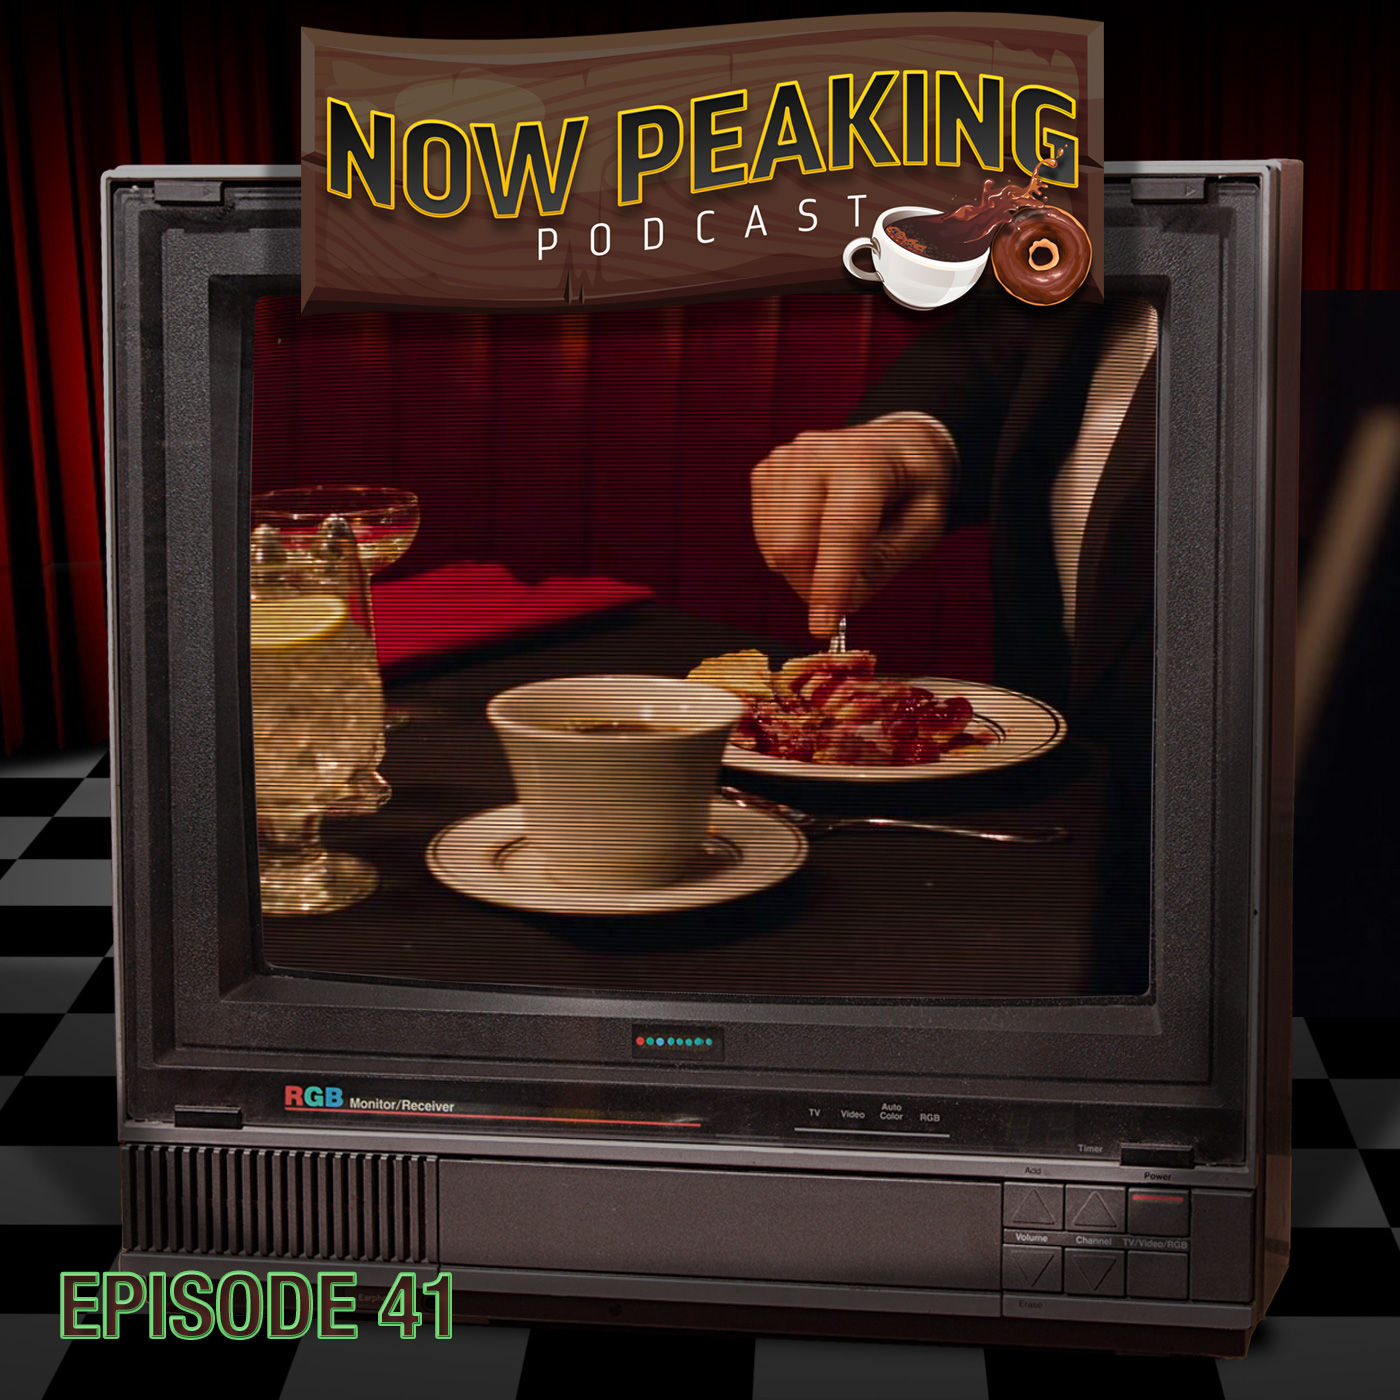 Now Peaking Episode 41: There’s fire where you are going  - For Annual Subscribers 